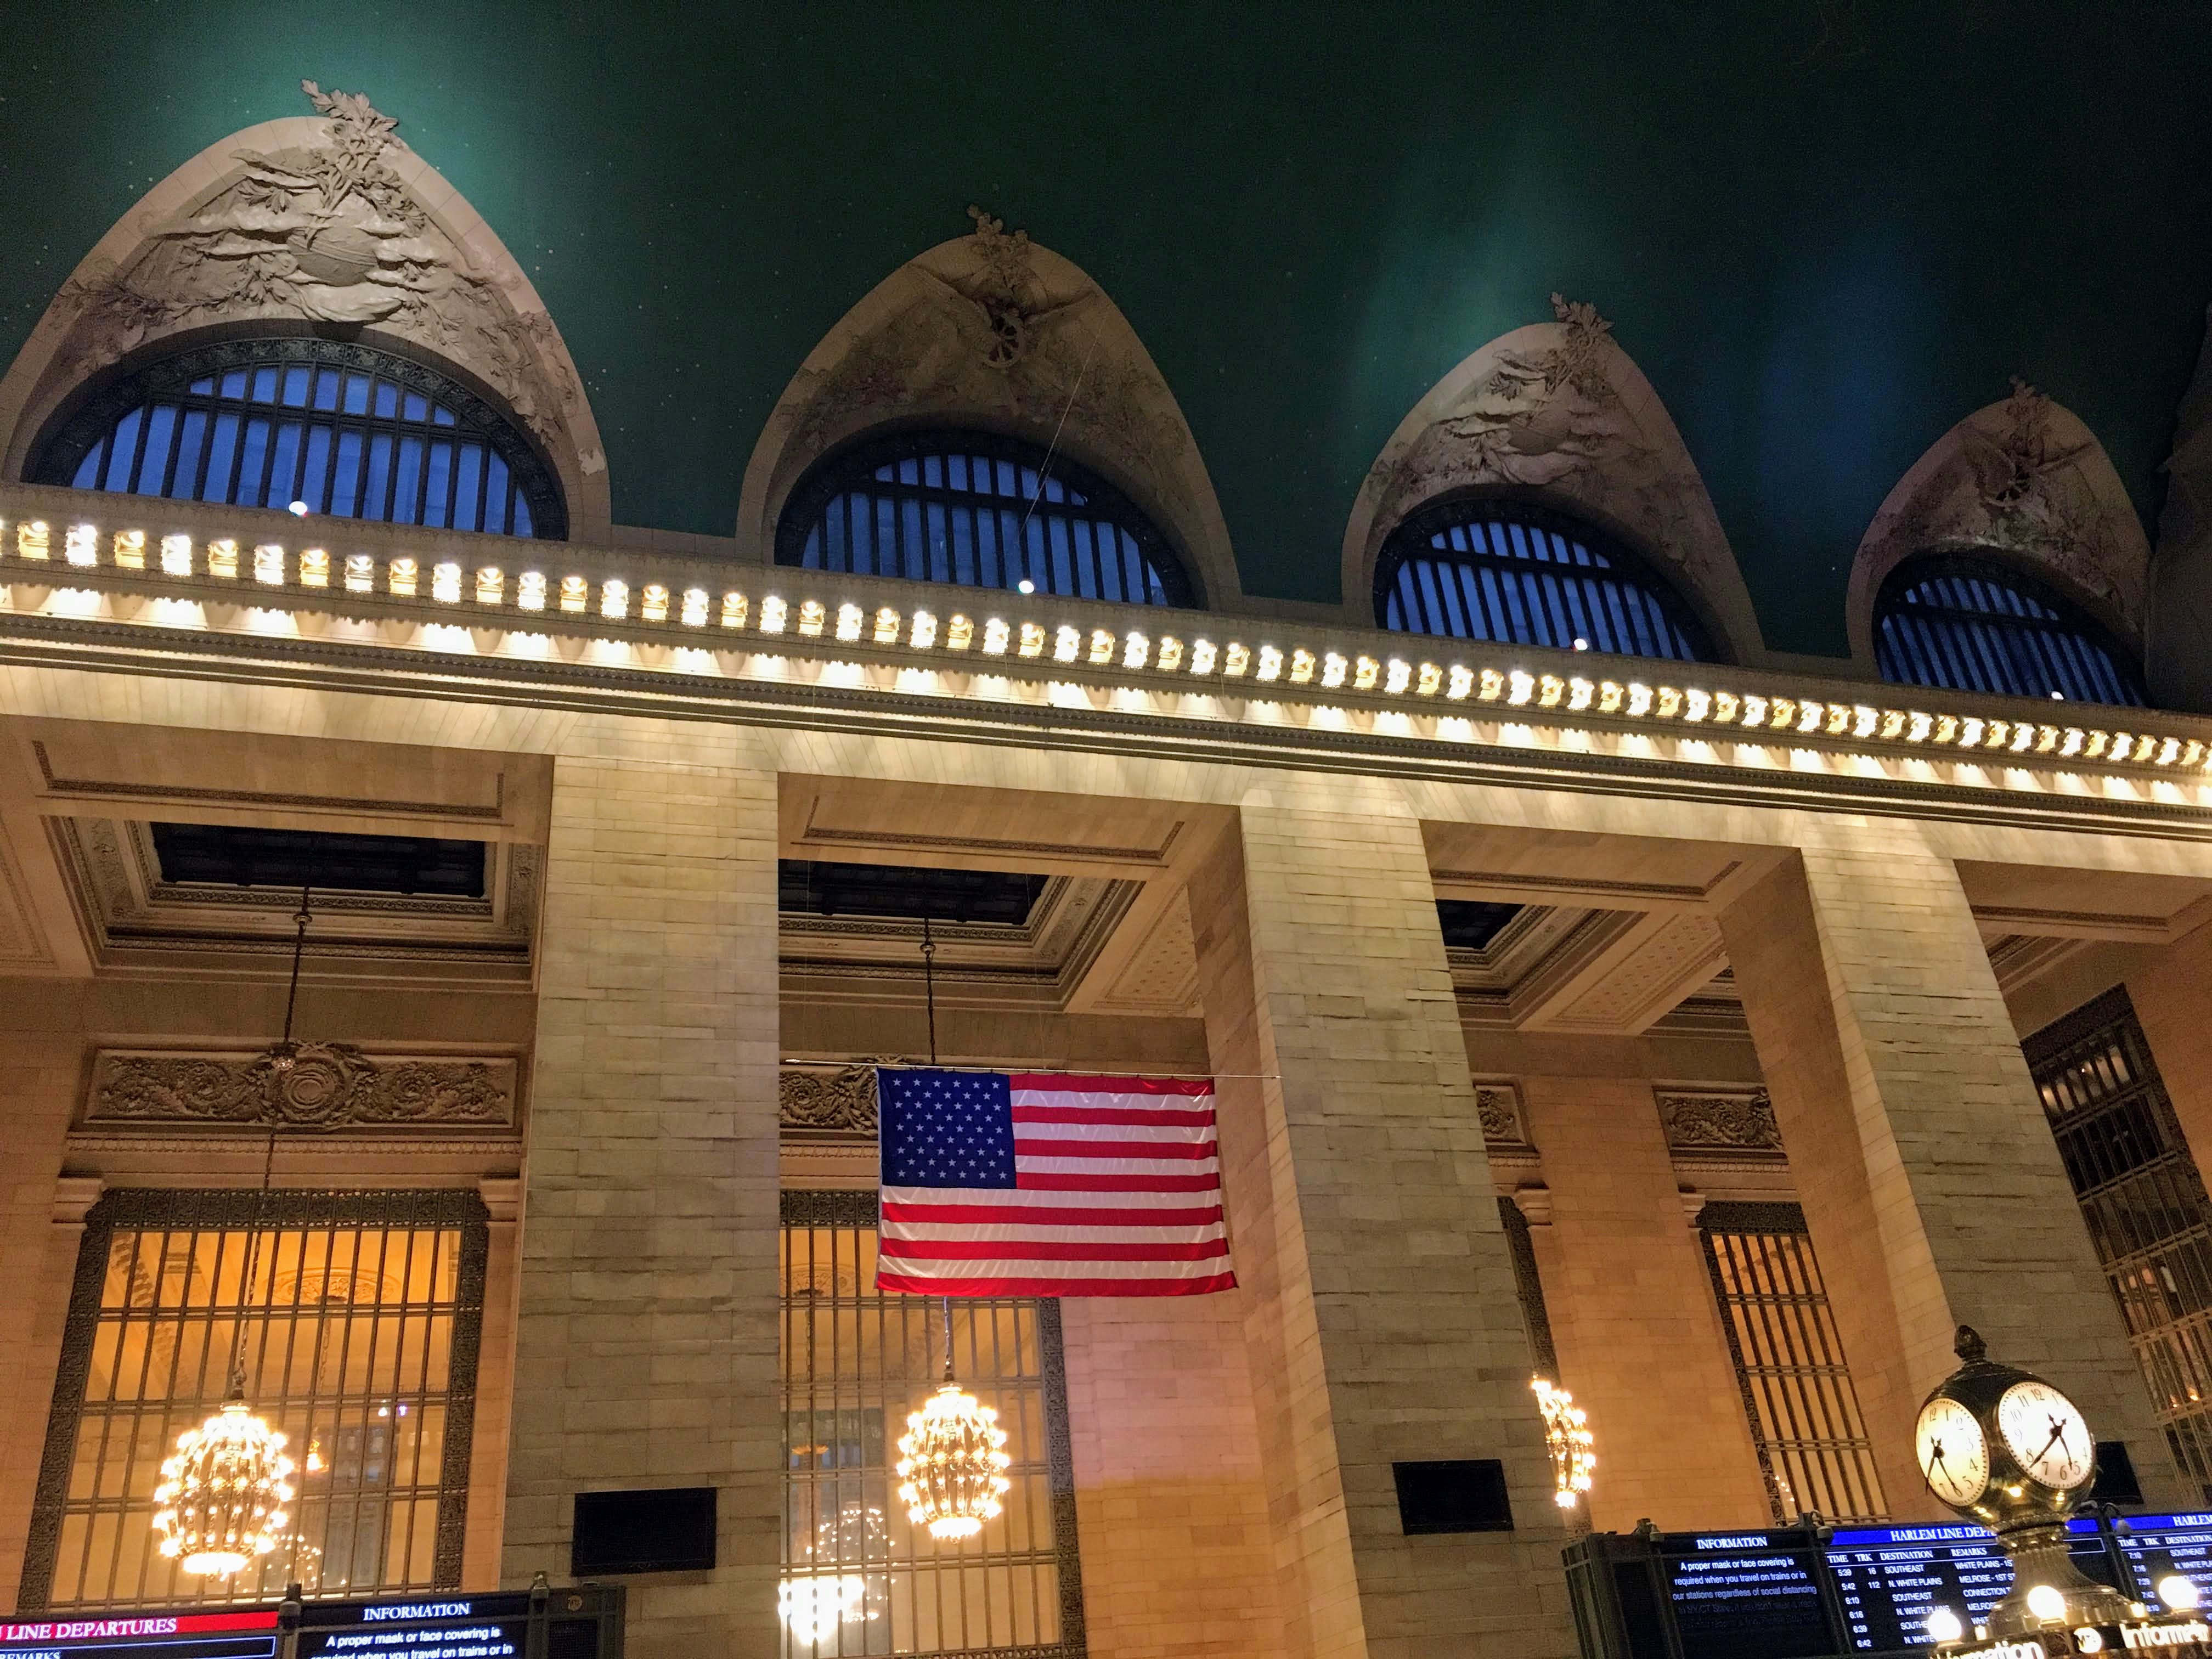 Grand-Central-terminal-NYC-connected-to-Railroads-Harlem-Hudson-and-New-Haven-Lines